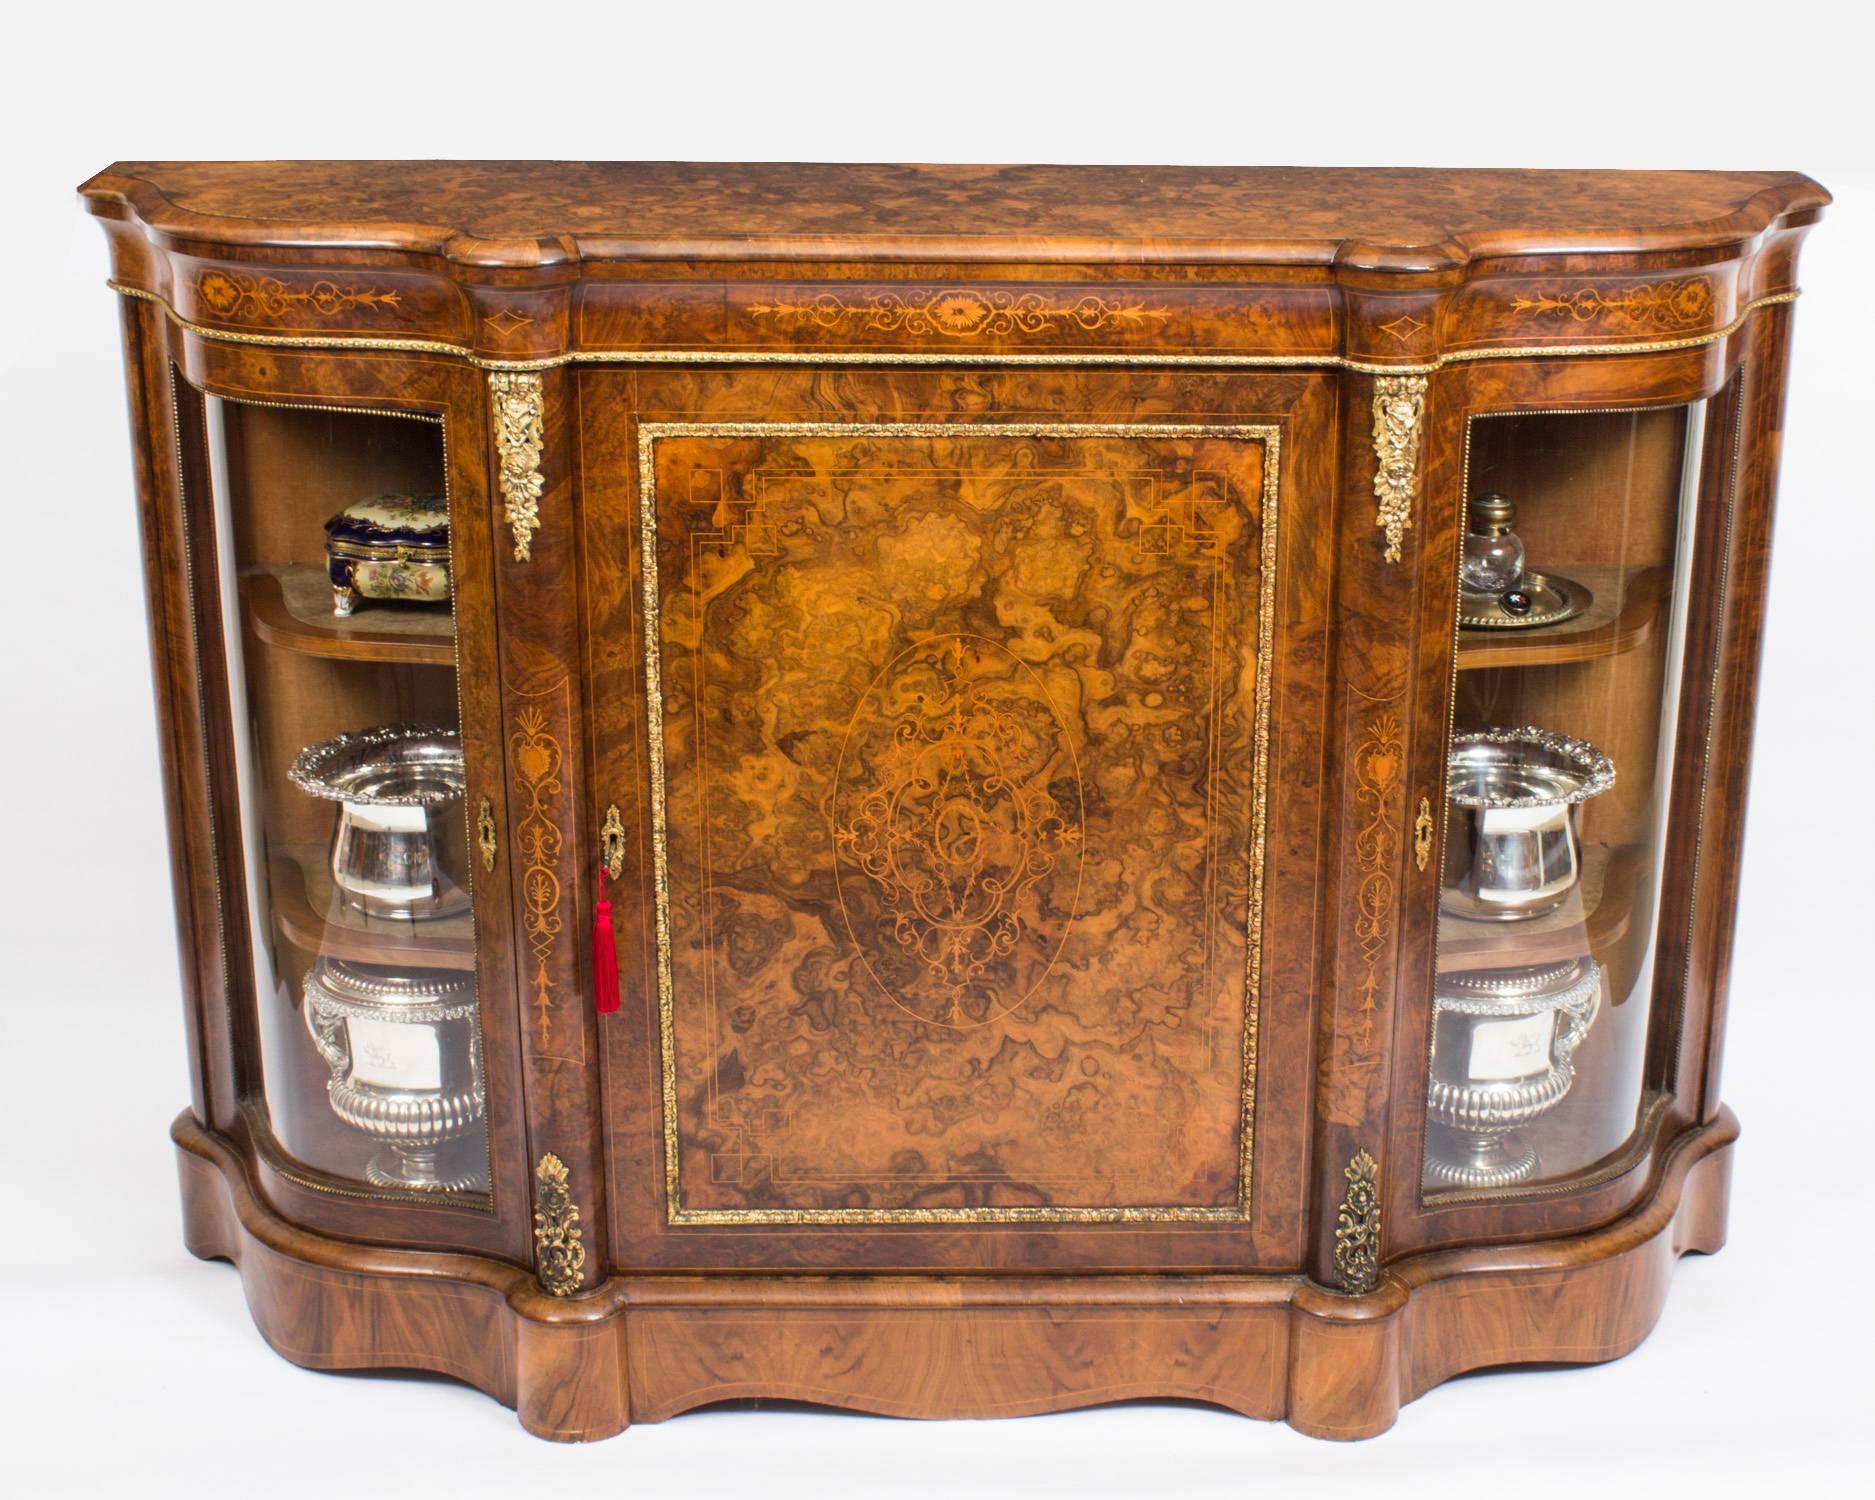 This is a wonderful antique Victorian burr walnut inlaid and ormolu-mounted credenza, circa 1860 in date.

Oozing sophistication and charm, this credenza is the absolute epitome of Victorian High Society. Its attention to detail and lavish